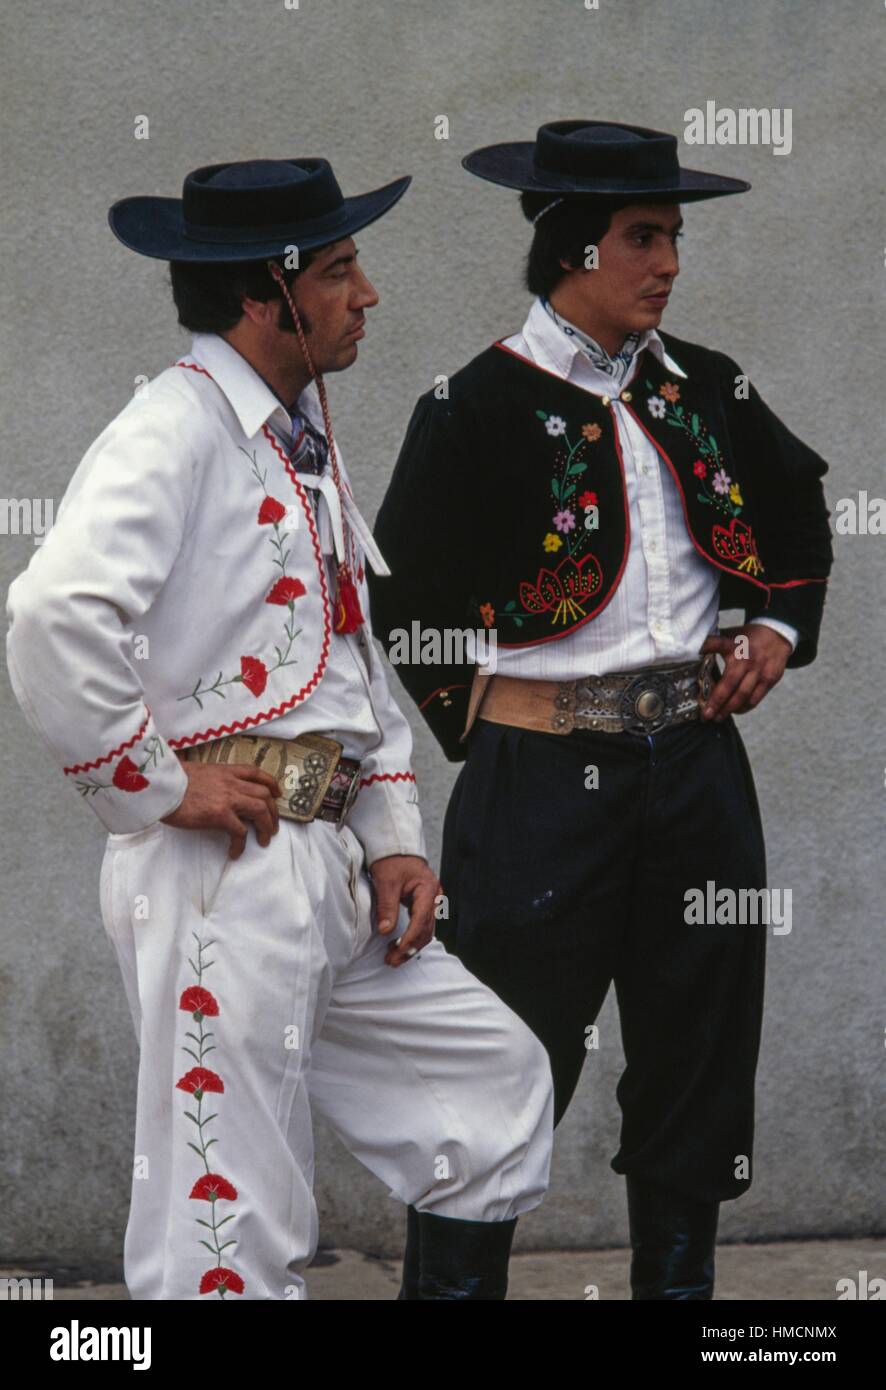 Gauchos wearing traditional hats and clothes, Argentina Stock Photo - Alamy